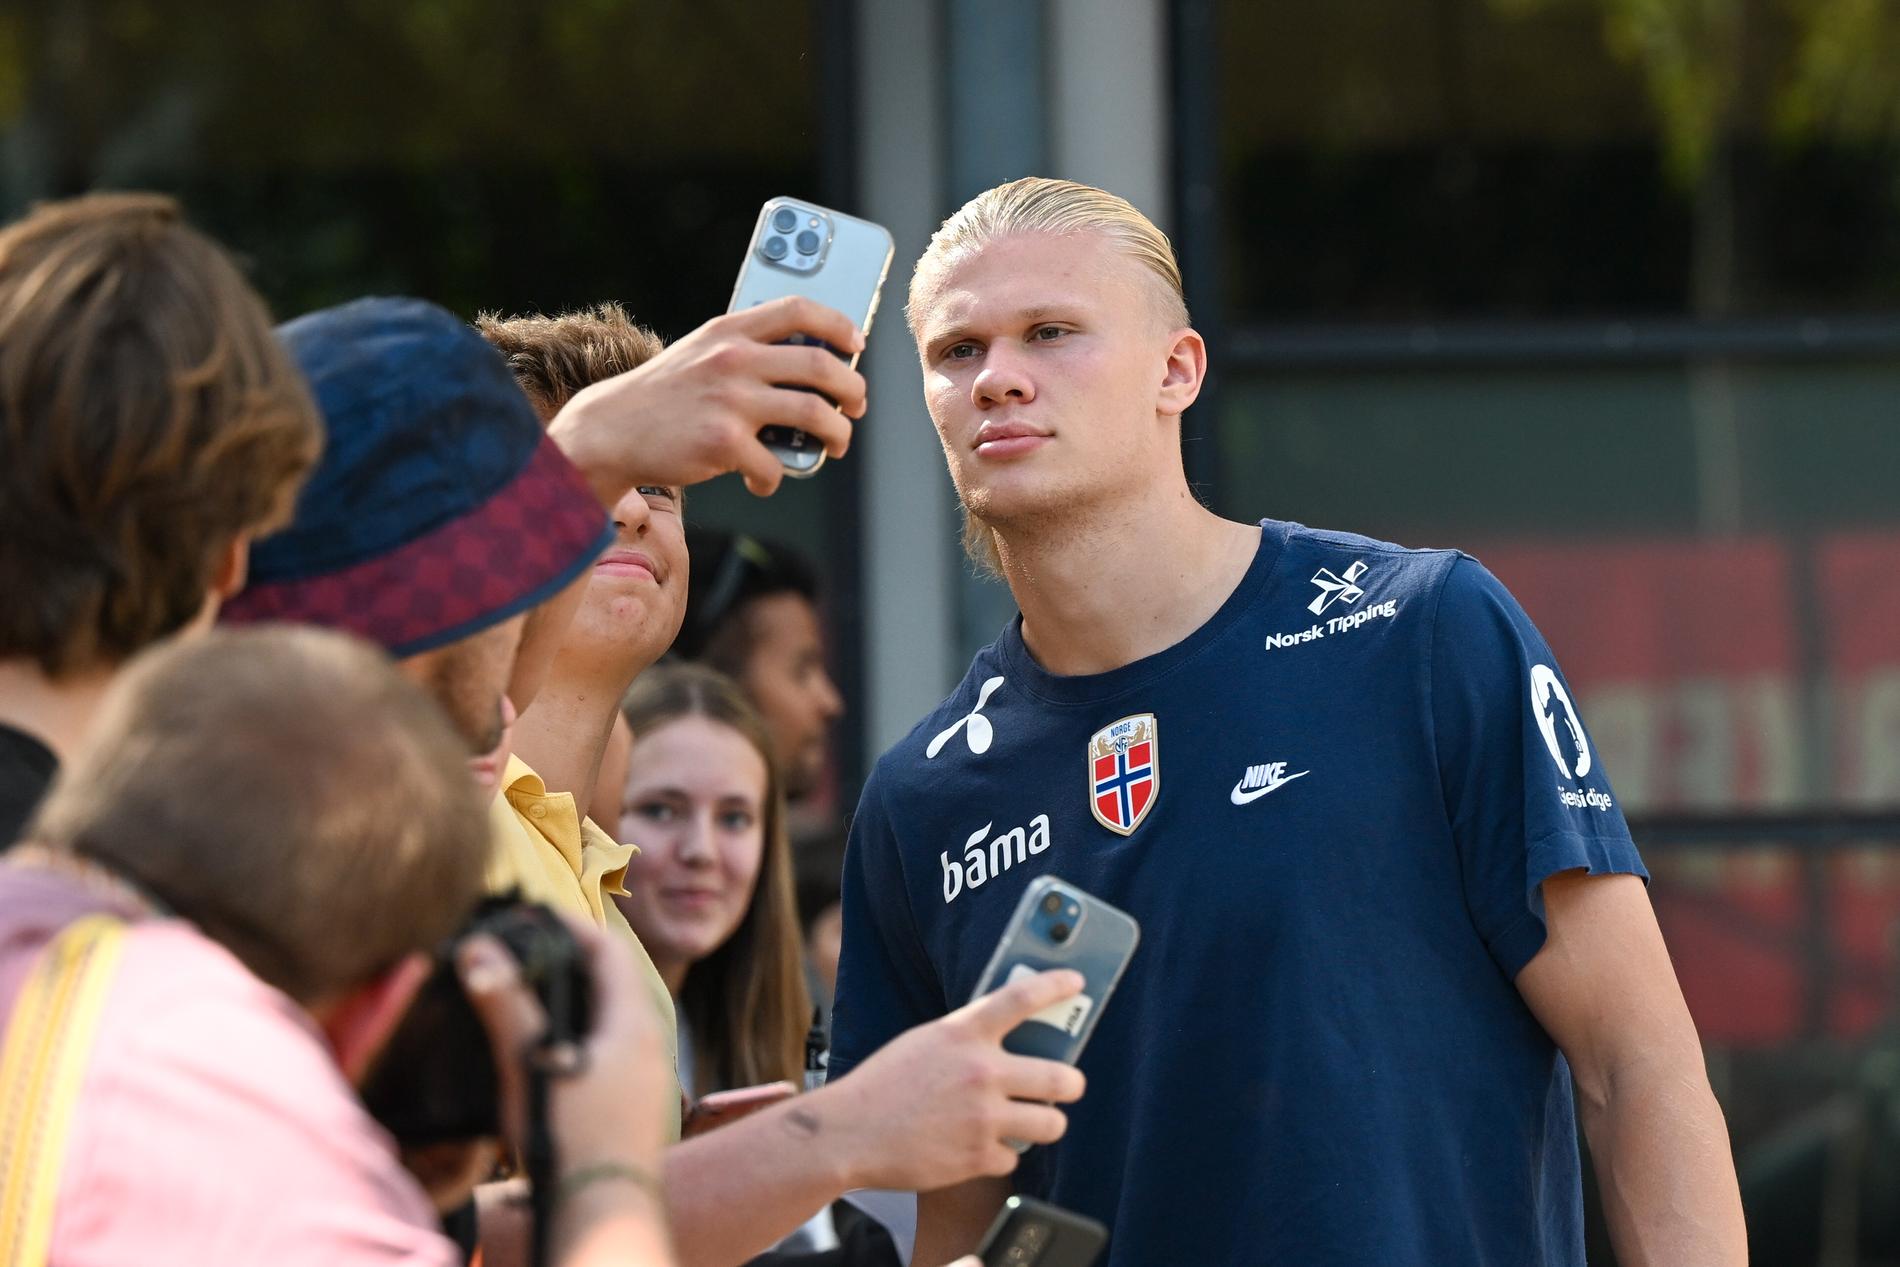 With or not?  Norwegian fans will have to wait until the last minute to find out if Erling Braut Haaland plays against Jordan on Thursday.